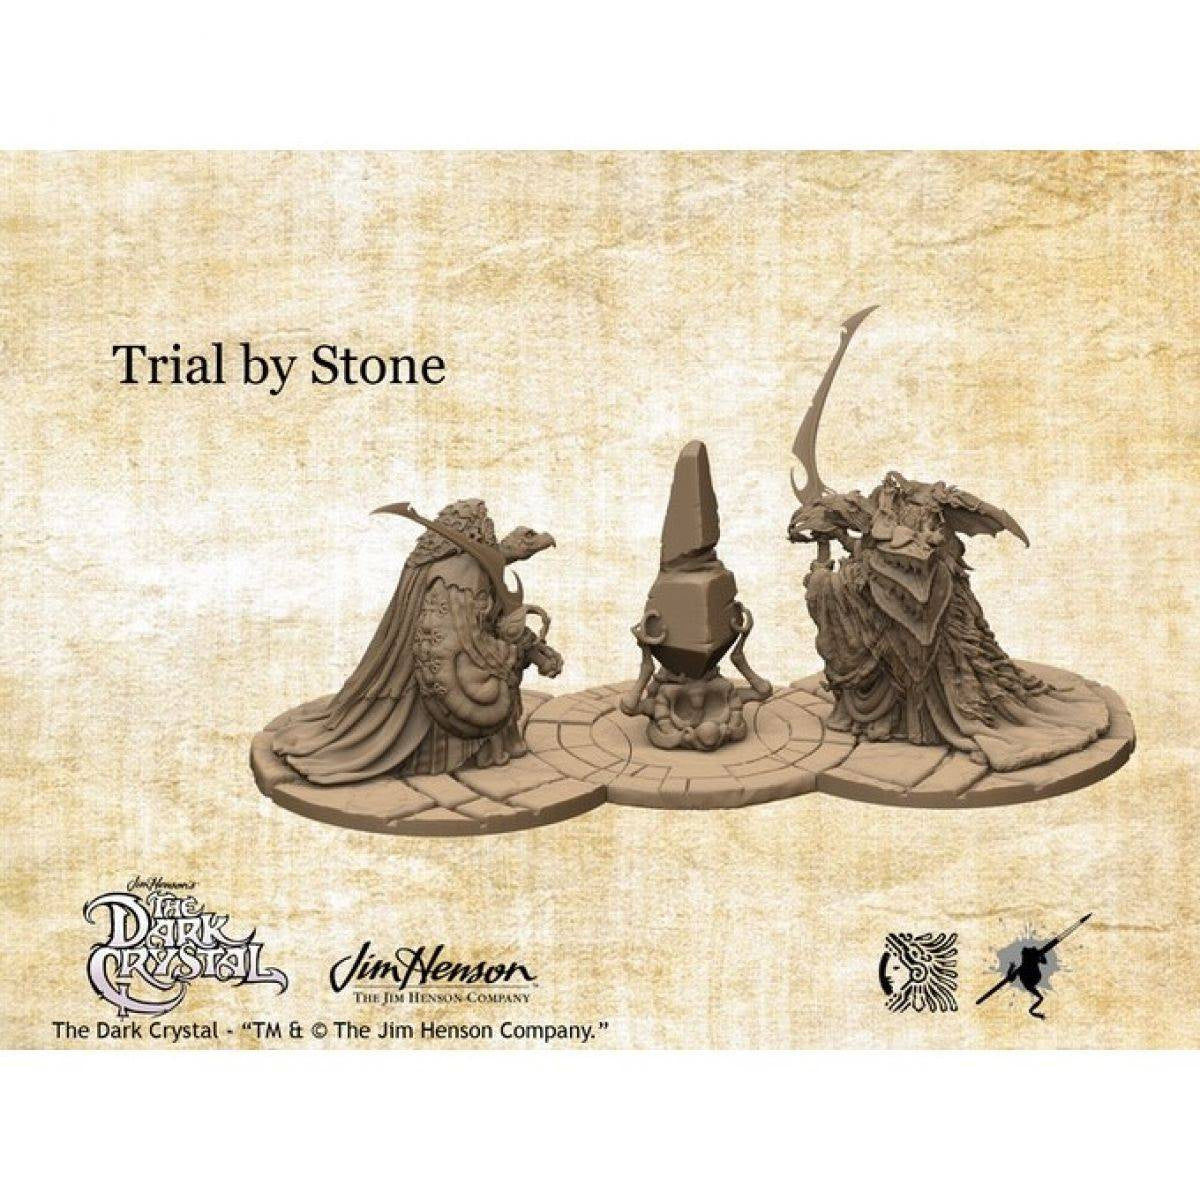 Jim Hensons Collectible Models - Trial by Stone